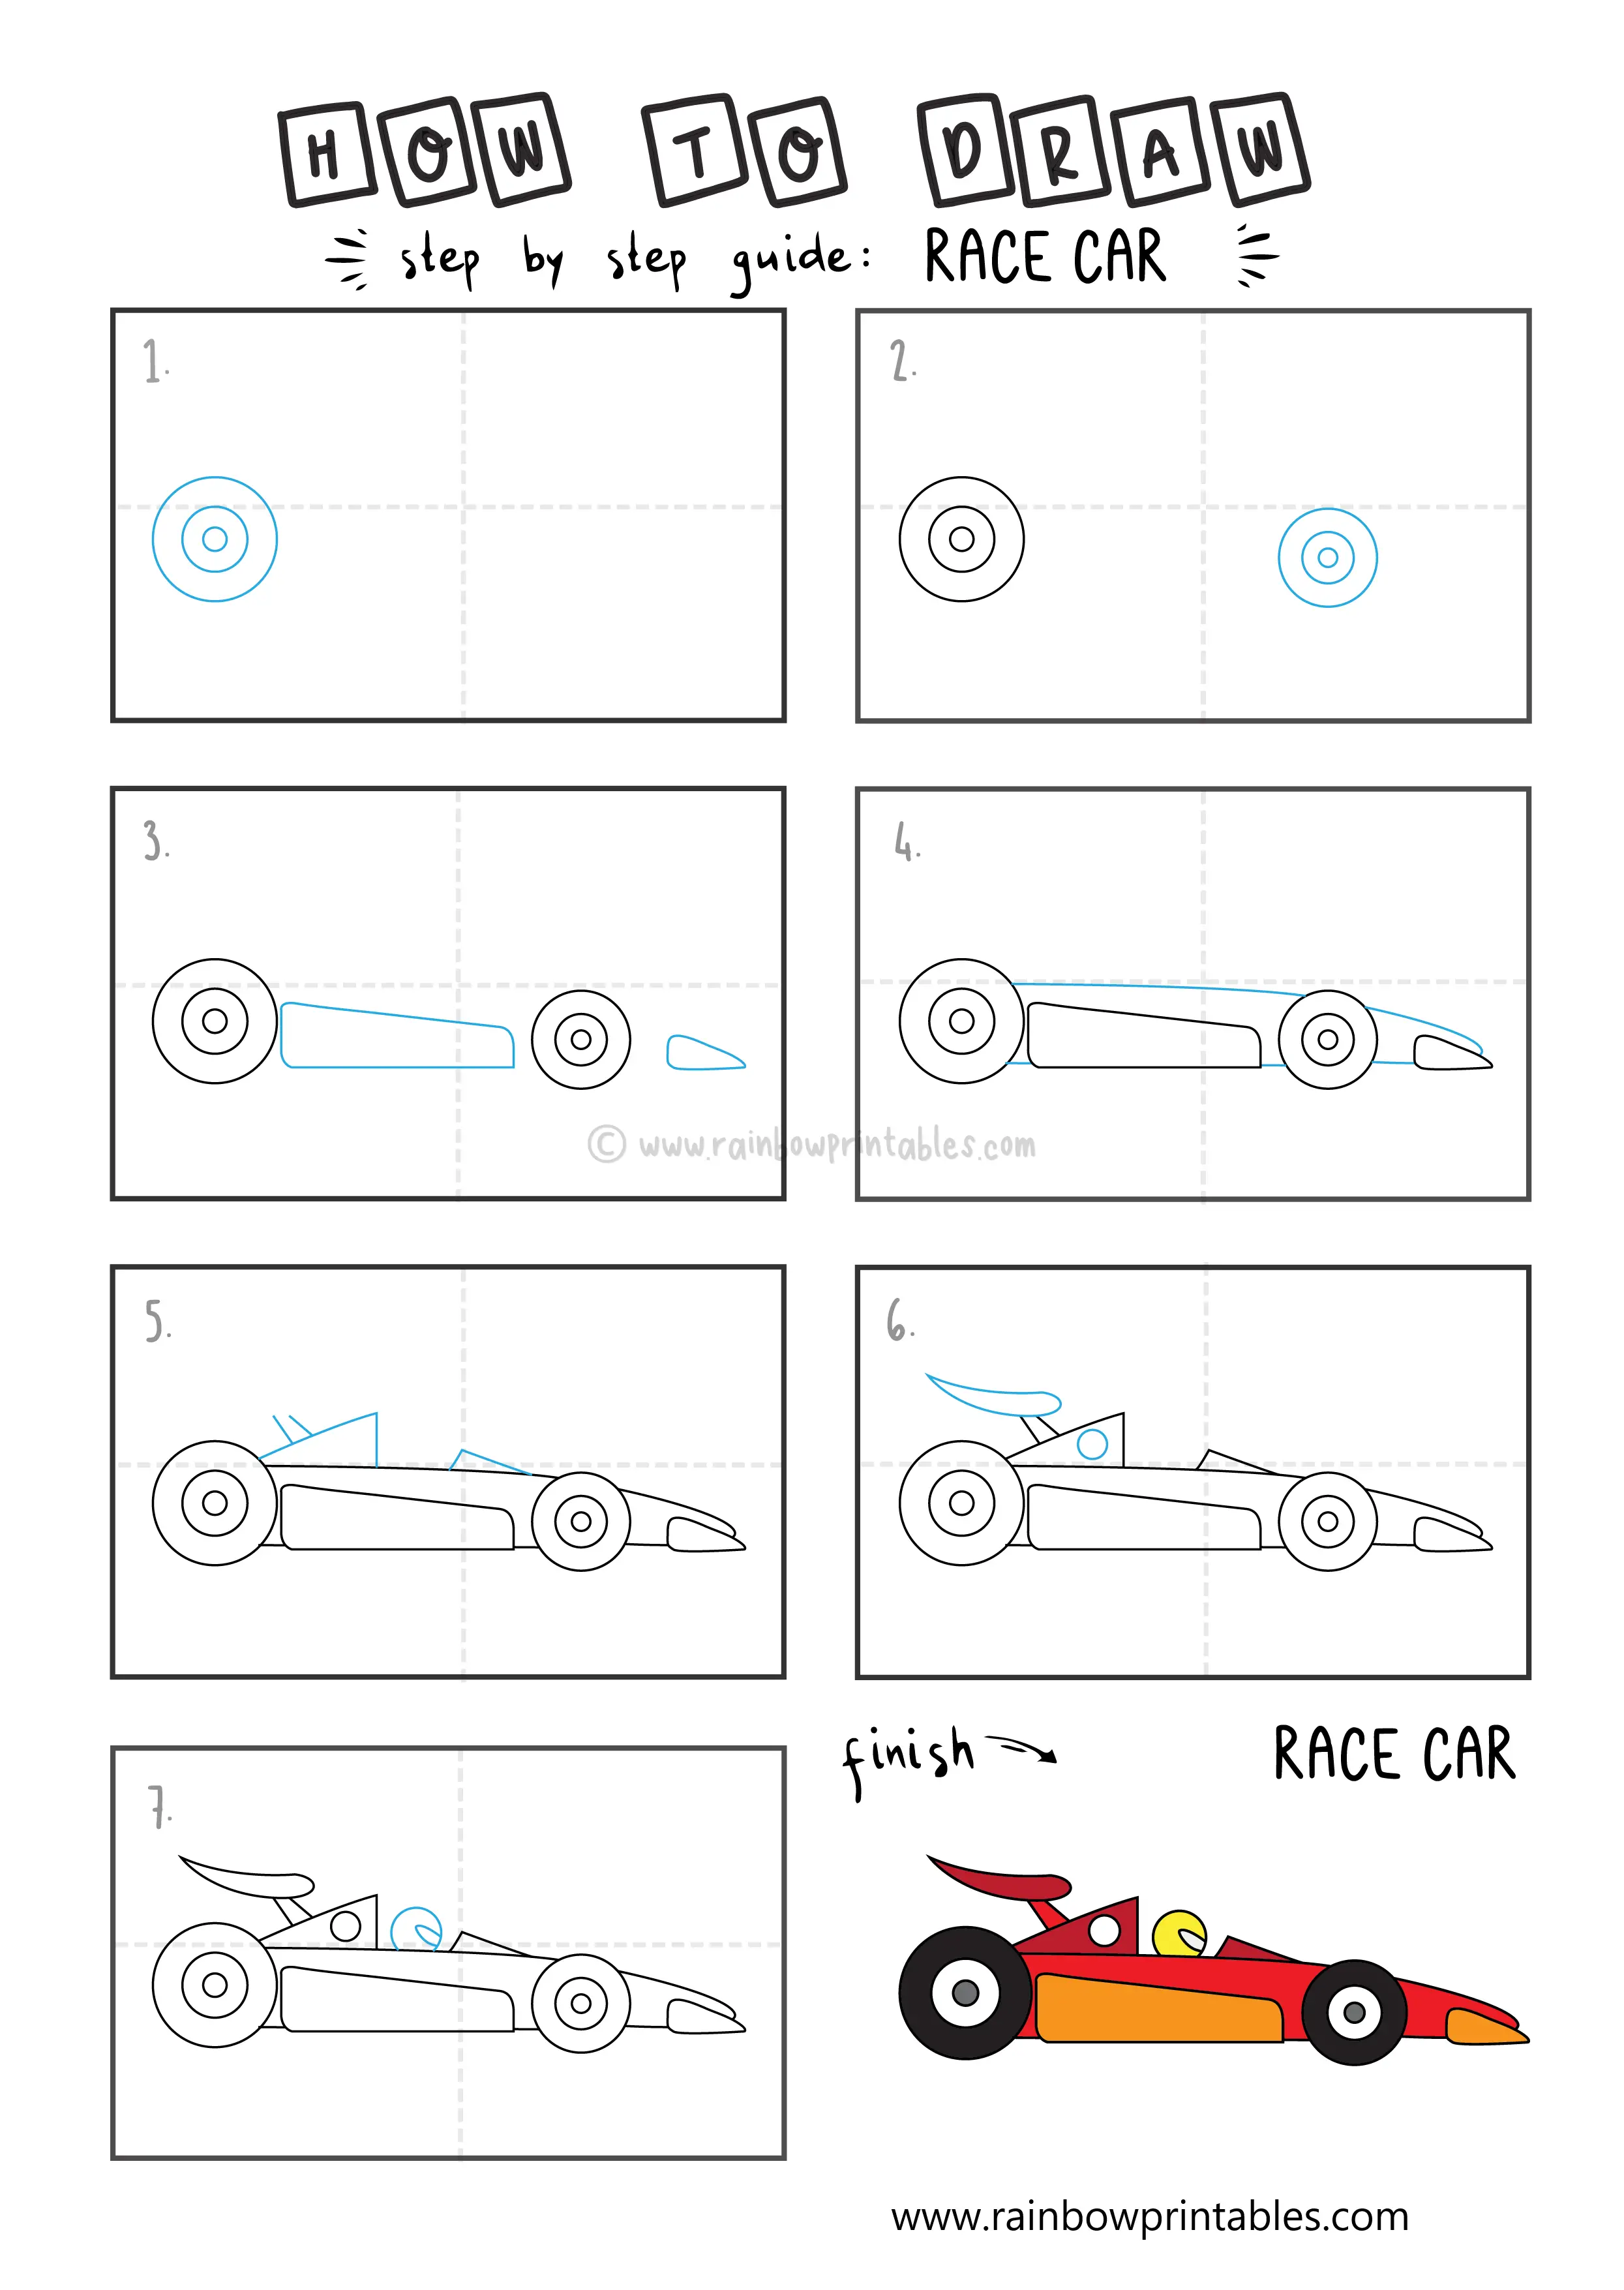 How To Draw a RACE CAR Easy Step By Step For Kids Illustration Art Ideas